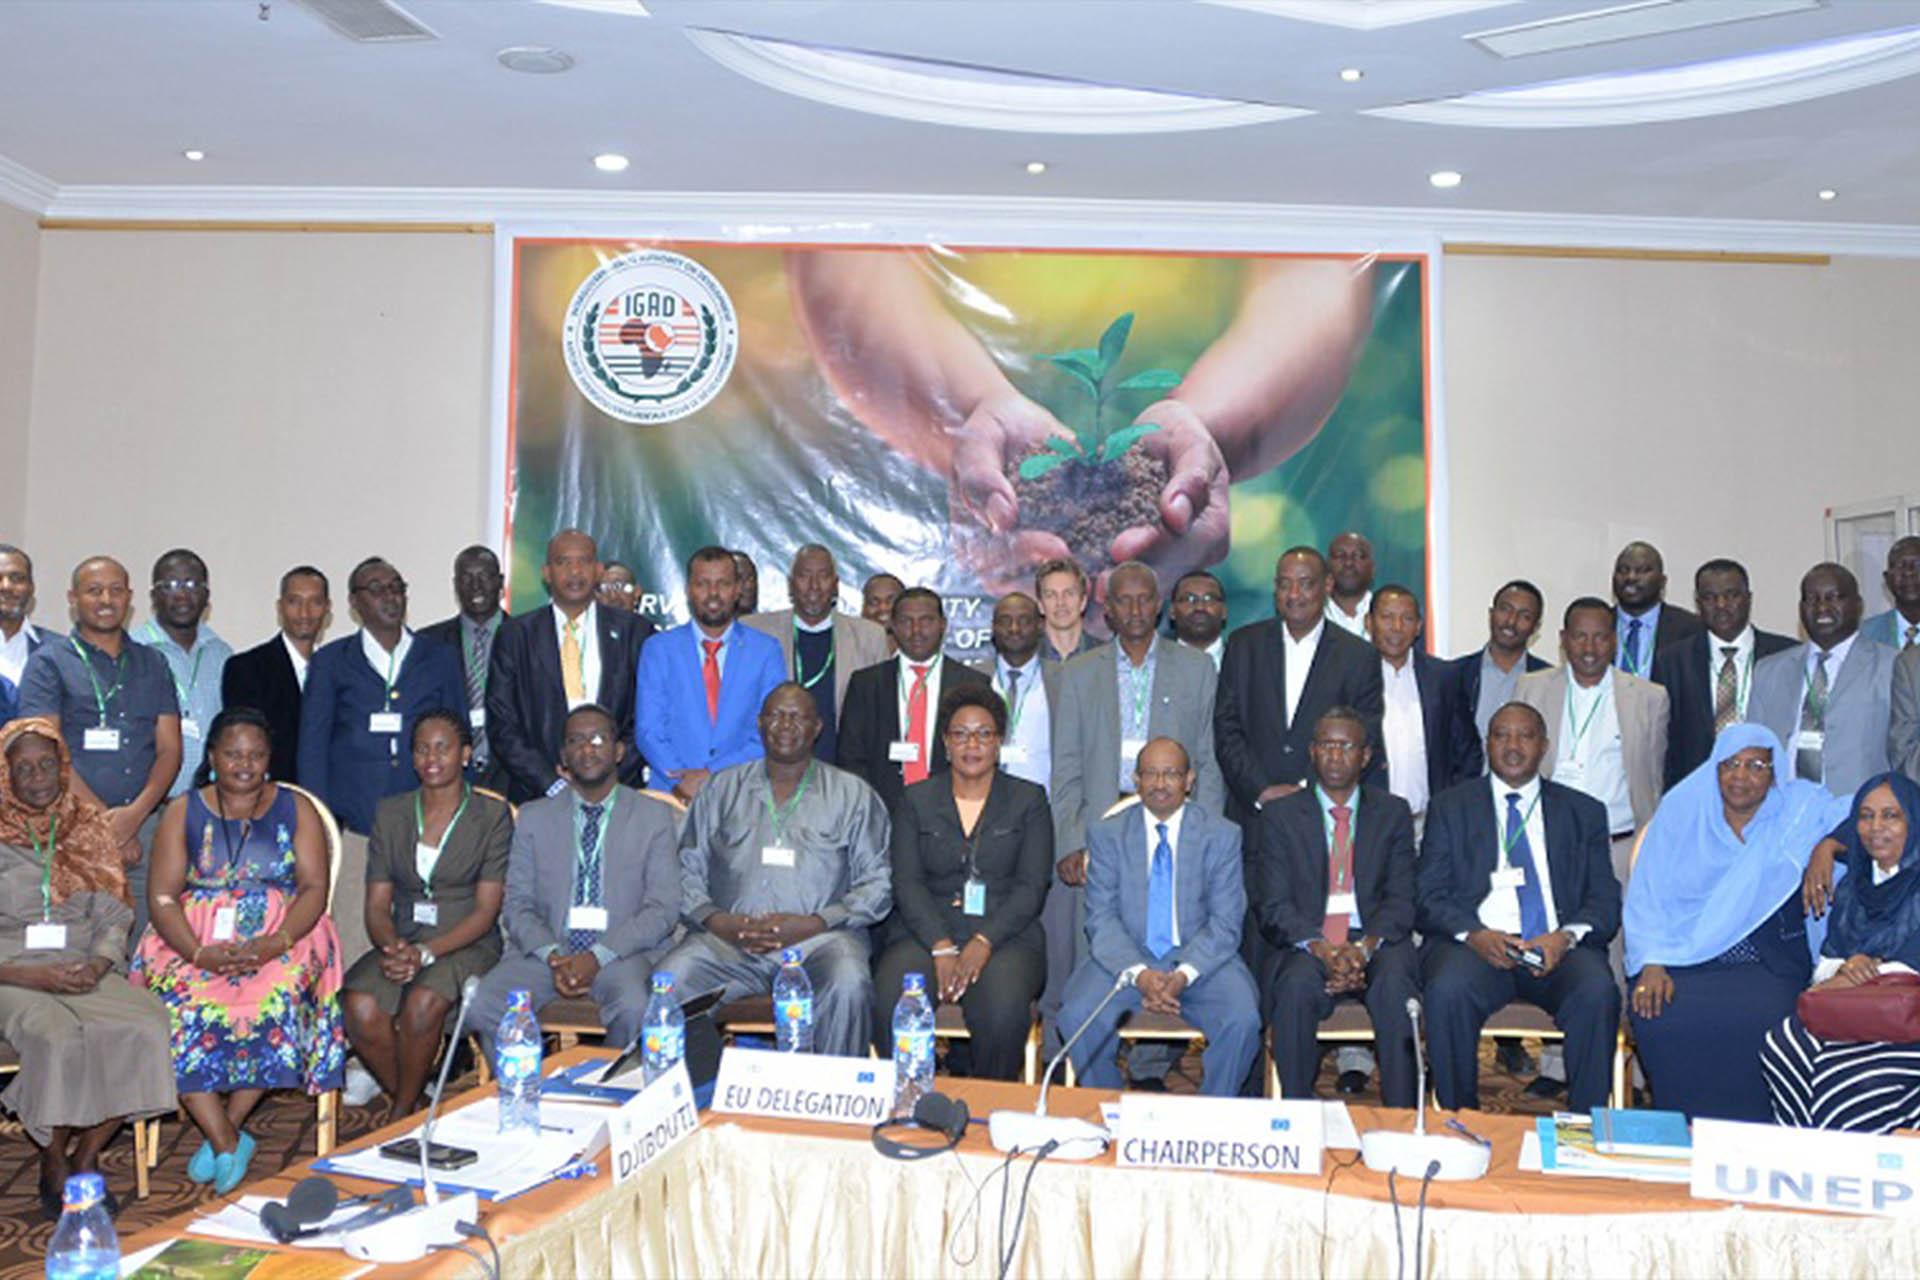 IGAD Consultative Meeting to discuss the 2nd phase of the IGAD Biodiversity Management Programme (BMP)  and on the Regional Pilot Project on the Restoration of Degraded Lands / Ecosystems in the IGAD Region